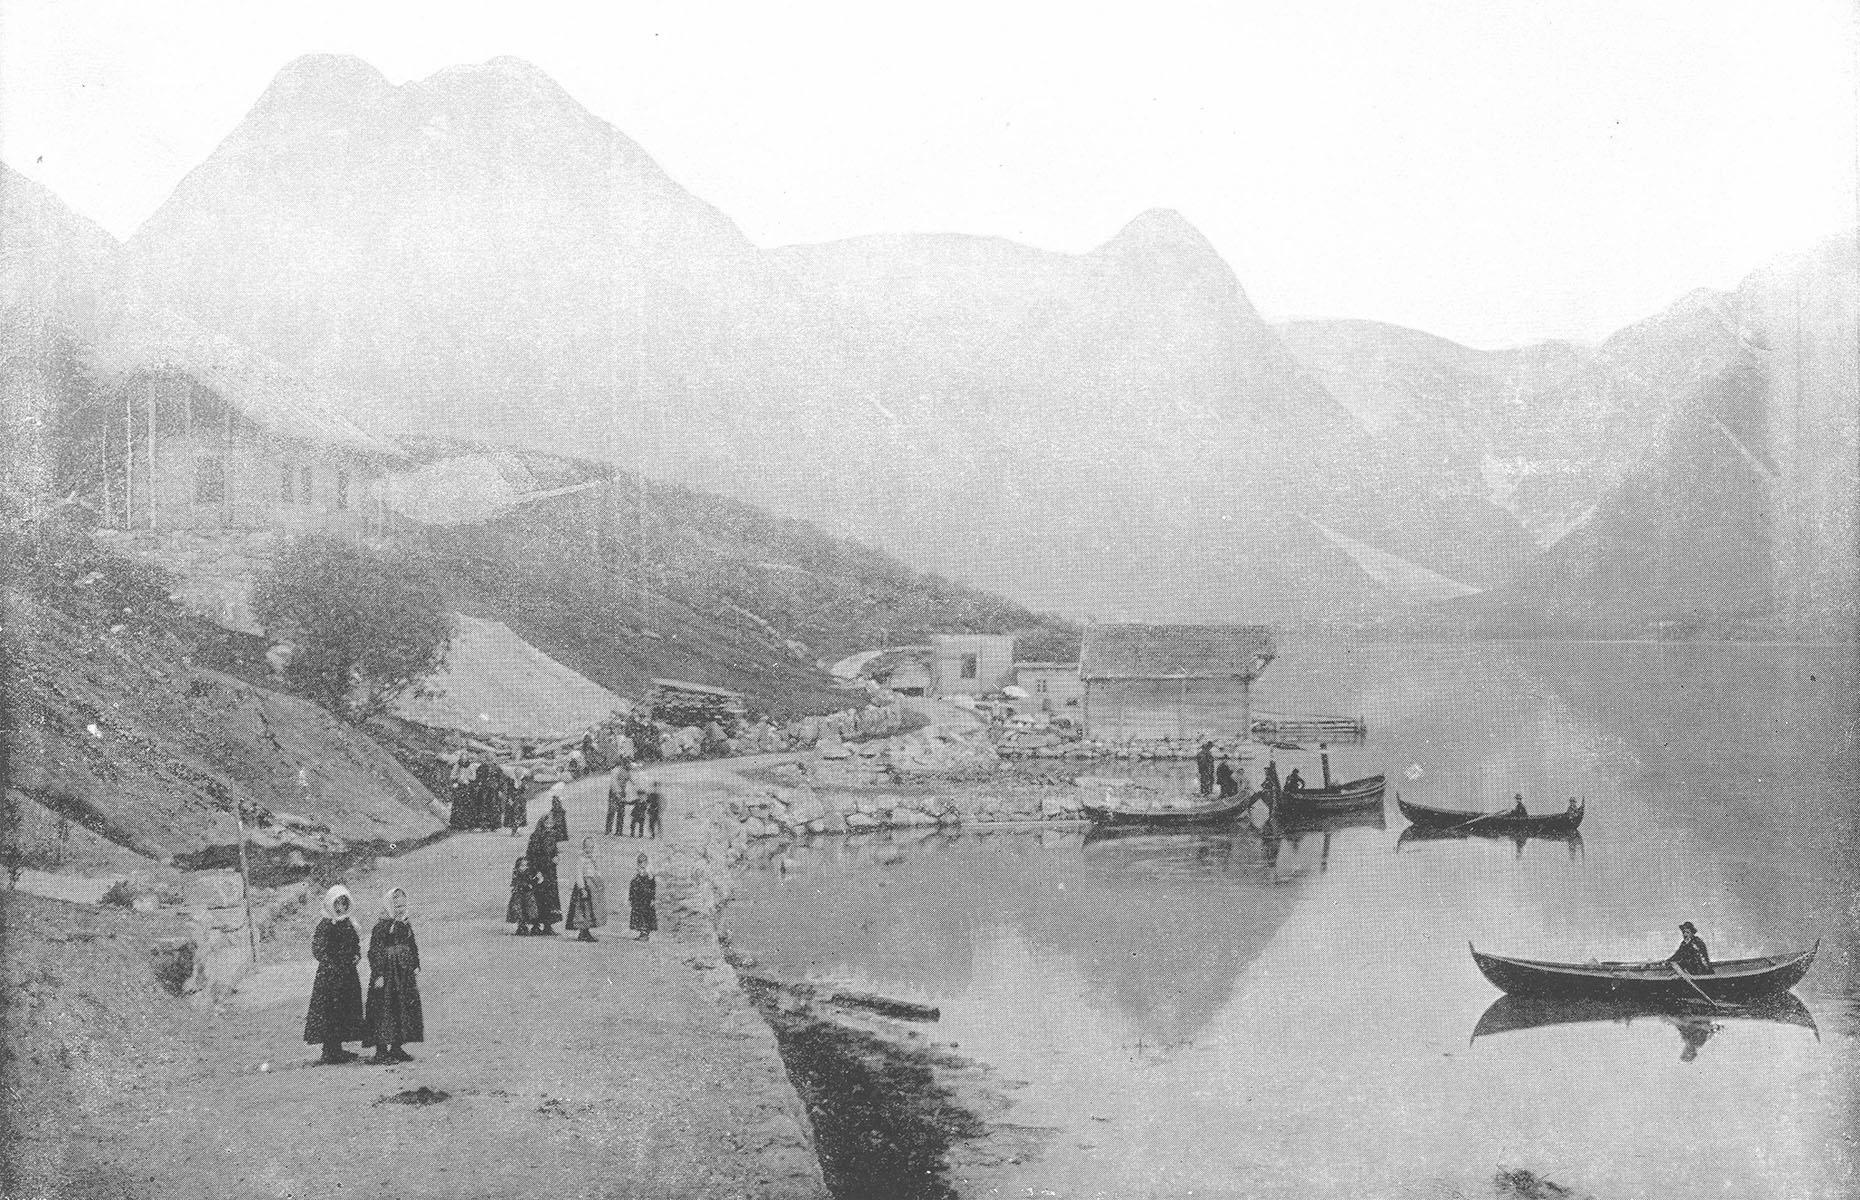 <p>Mundal is a small community that sits beside the water of Fjaerlandsfjorden. It was settled during the time of the Vikings and now serves as a base for hikers who walk the trails that branch out along the fjord and up the surrounding mountains. Times were difficult when this photo was taken in 1895, and many of Mundal’s citizens chose to emigrate to America for a new life rather than farm the difficult soil. Among them were the family of Walter Mondale, US Vice President under Jimmy Carter, who opened Fjaerland's first road connection in 1986.</p>